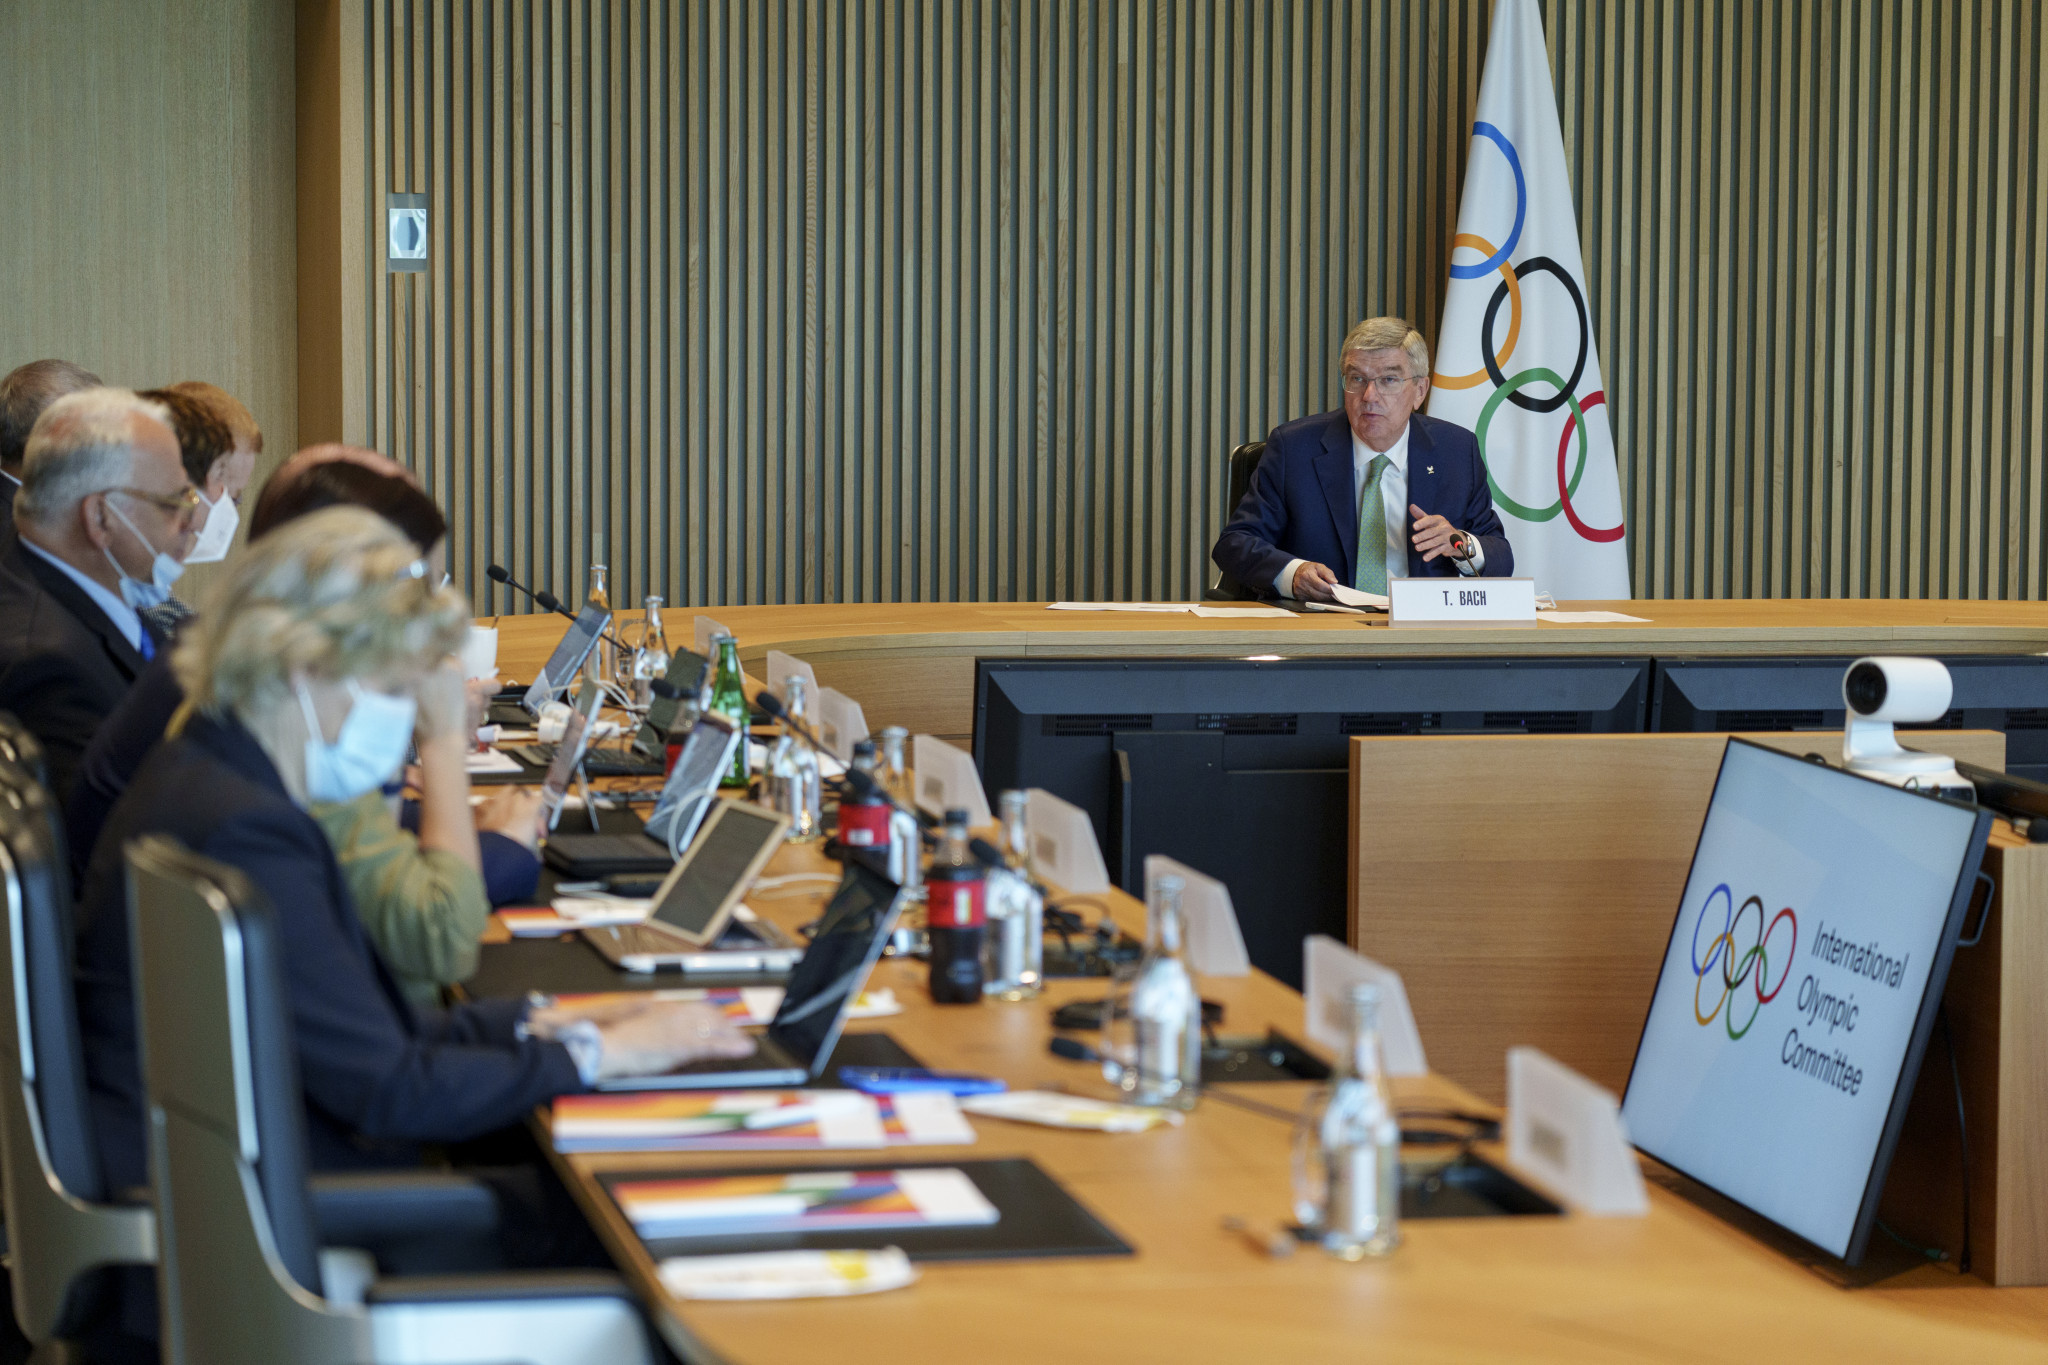 Criteria for the Los Angeles 2028 sporting programme were approved at the IOC Executive Board meeting in Lausanne ©IOC/Greg Martin